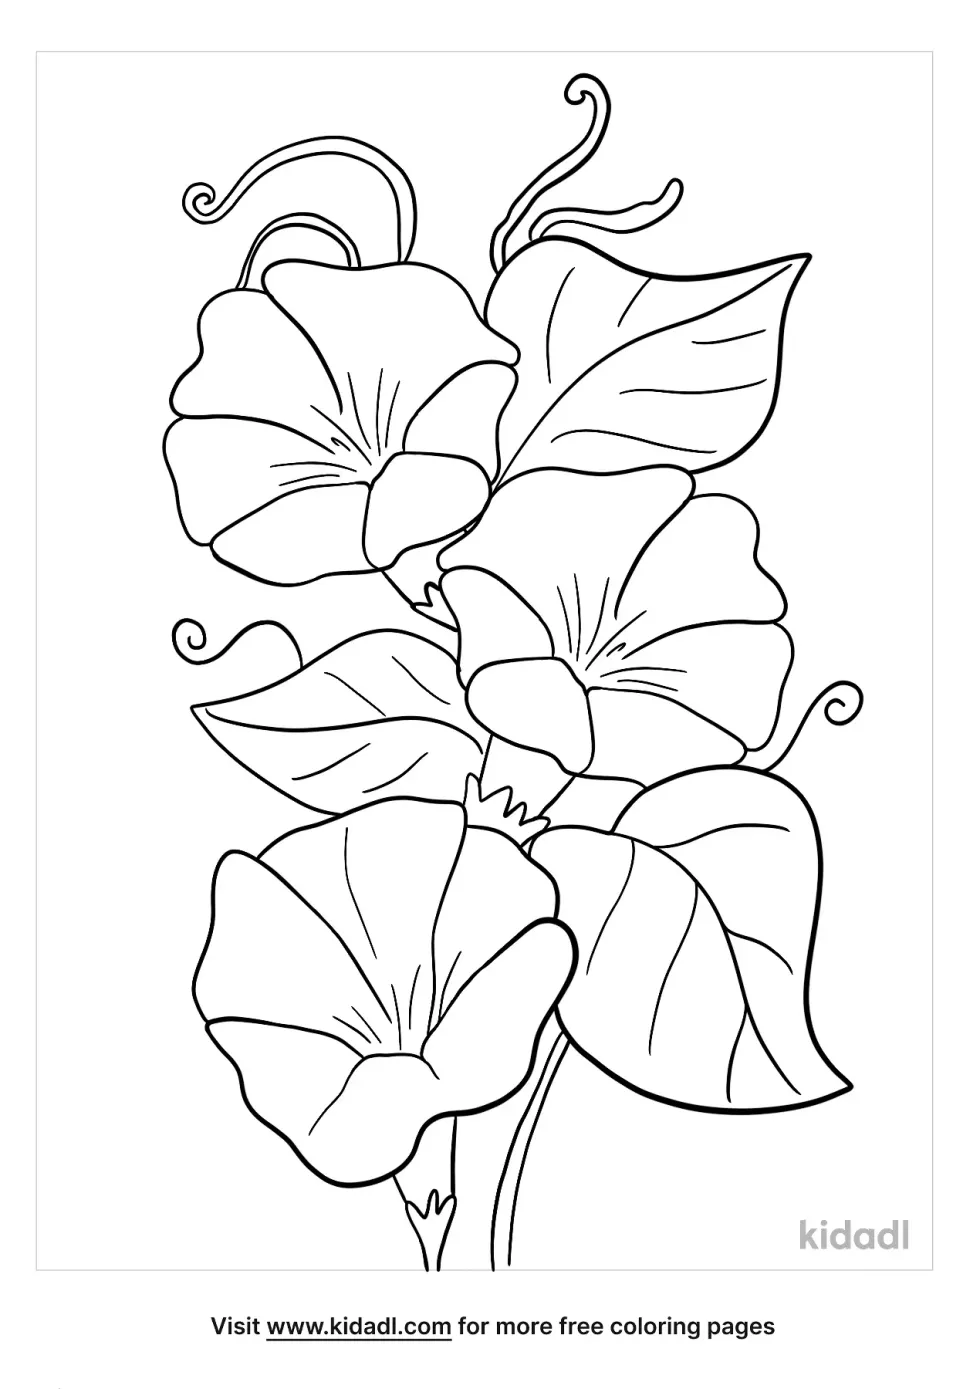 Morning Glory Coloring Page